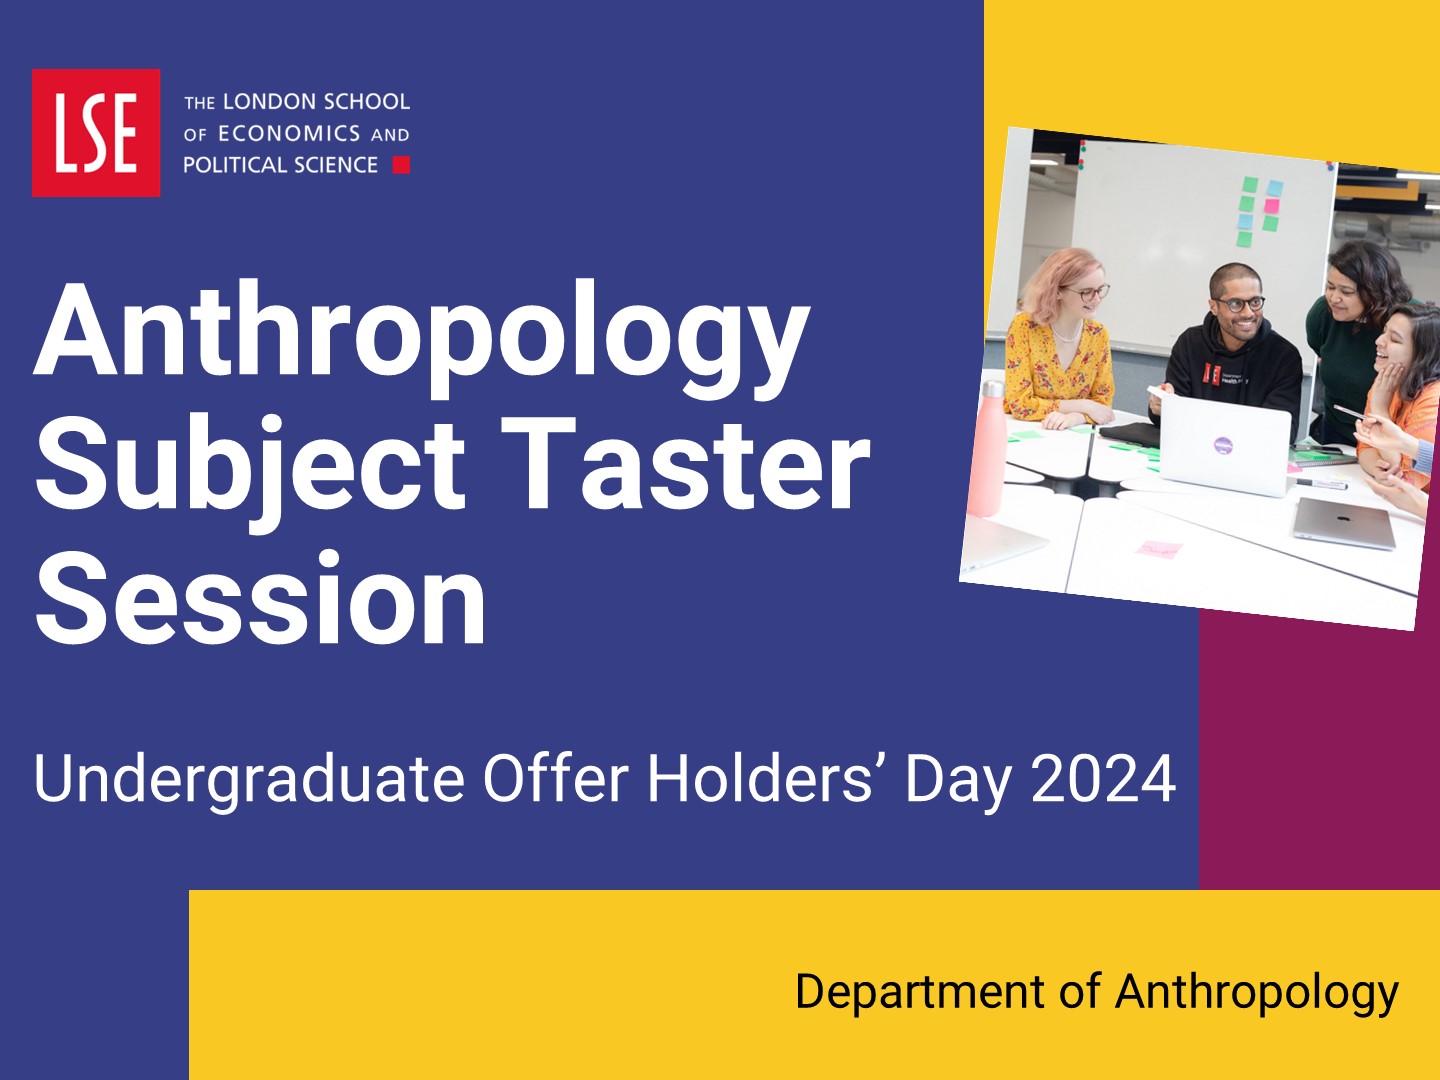 Watch the anthropology subject taster session